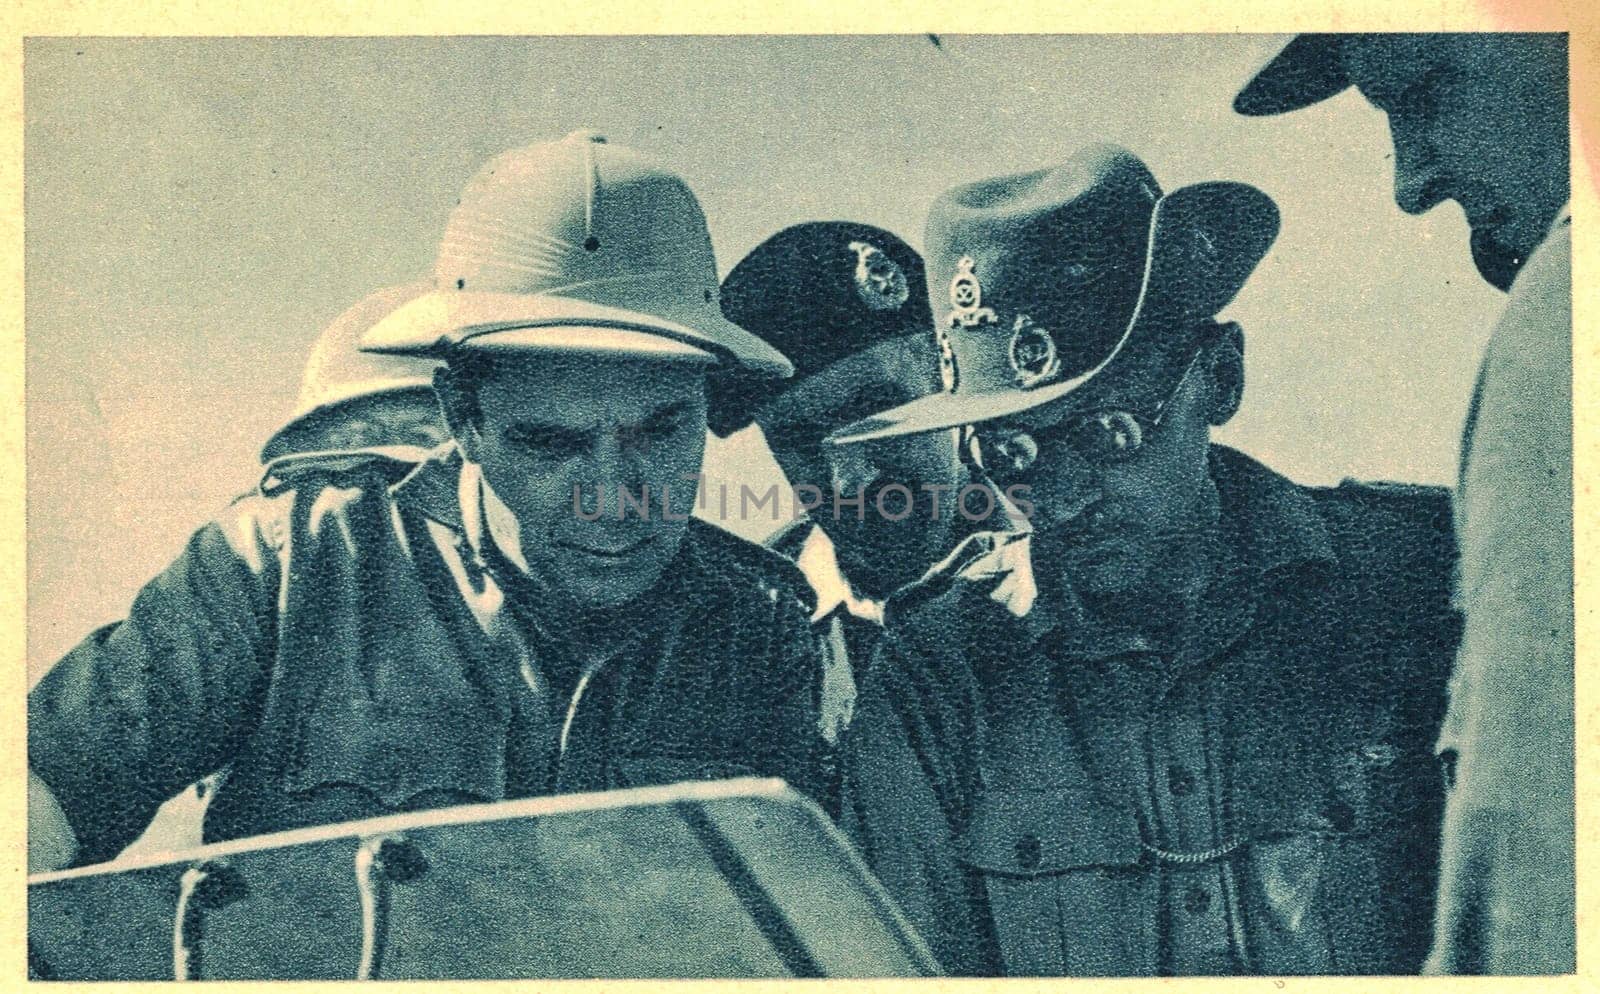 NORTH AFRICA - AUGUST, 1944: Wendell Willkie and Bernard Montgomery (wers sunglasses). Wilkie was an American lawyer, corporate executive, and the 1940 Republican nominee for President of the United States. Montgomery was a British Army officer, most noted for his involvement in World War II and often referred to as Monty.